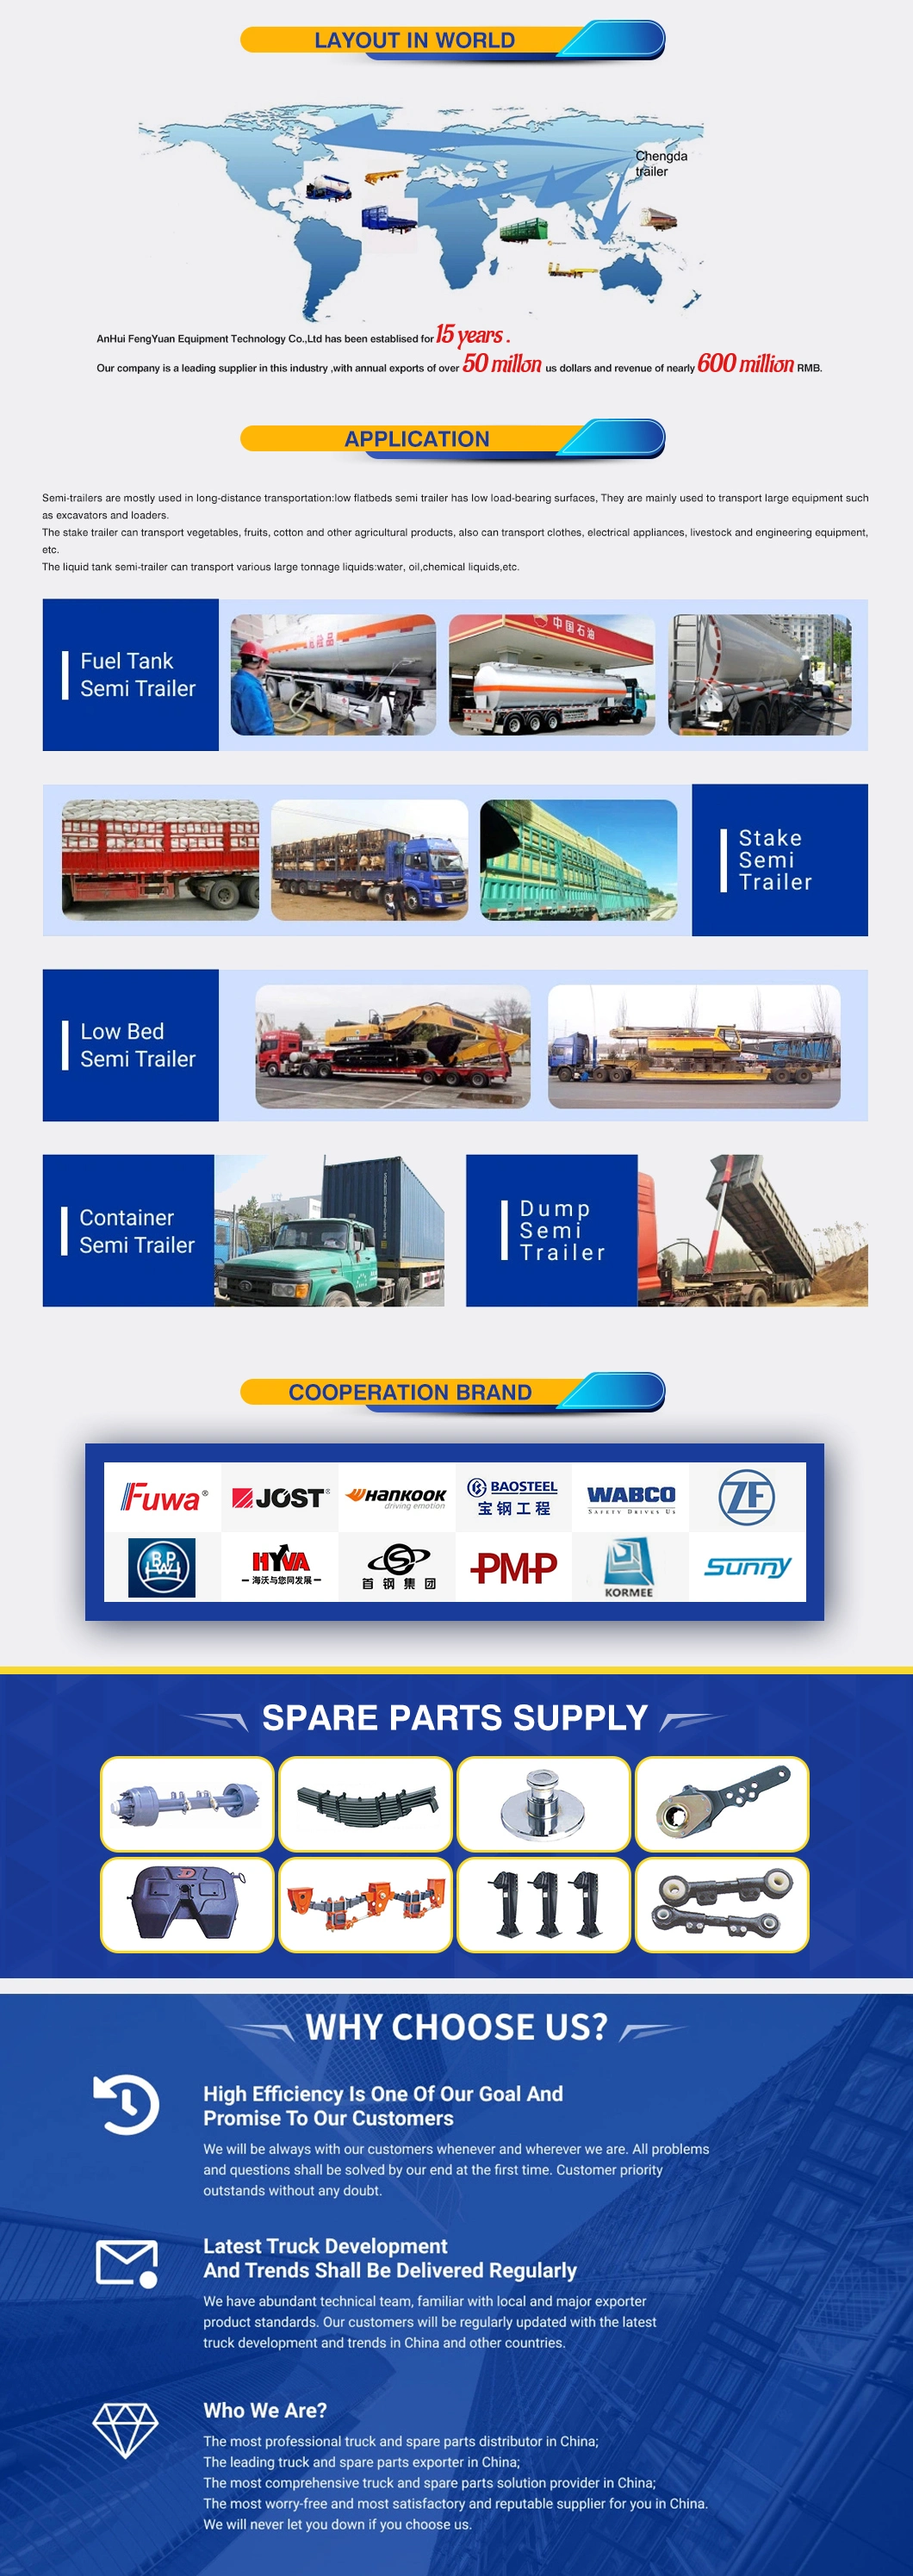 Hot Sale Triangle Axle 60 Tons Payload Capacity Flatbed Semi Trailer